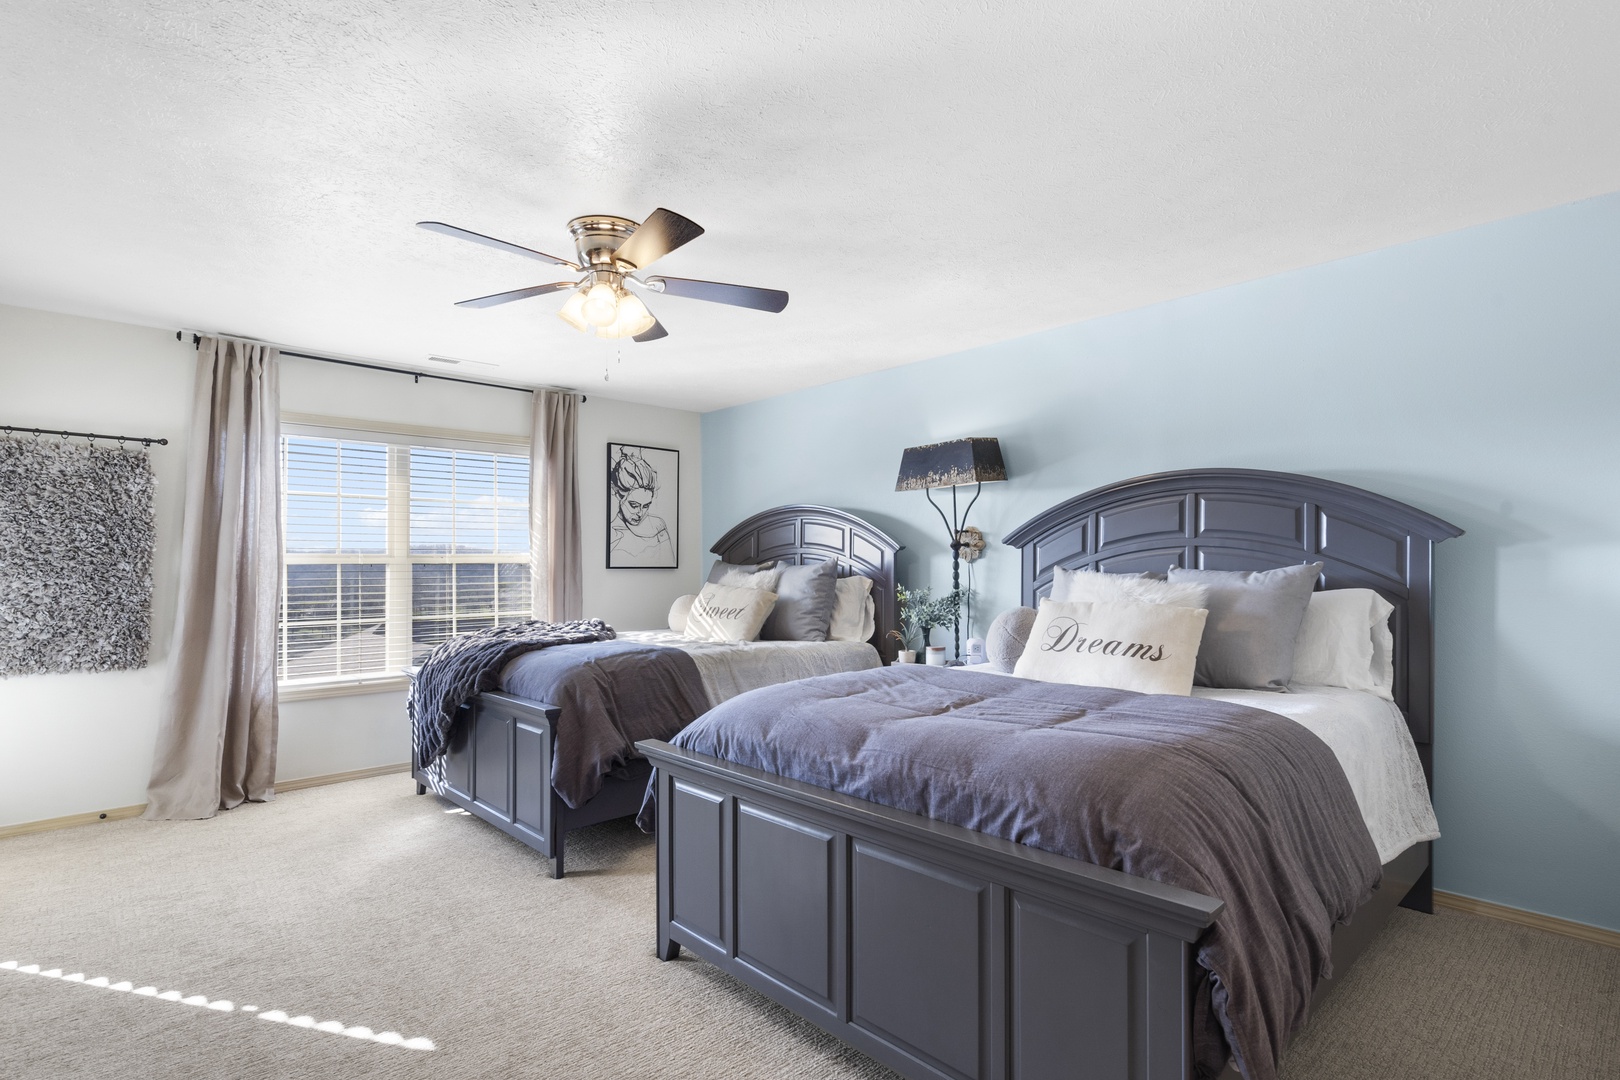 The master suite features a pair of queen beds, private ensuite, balcony access, & TV